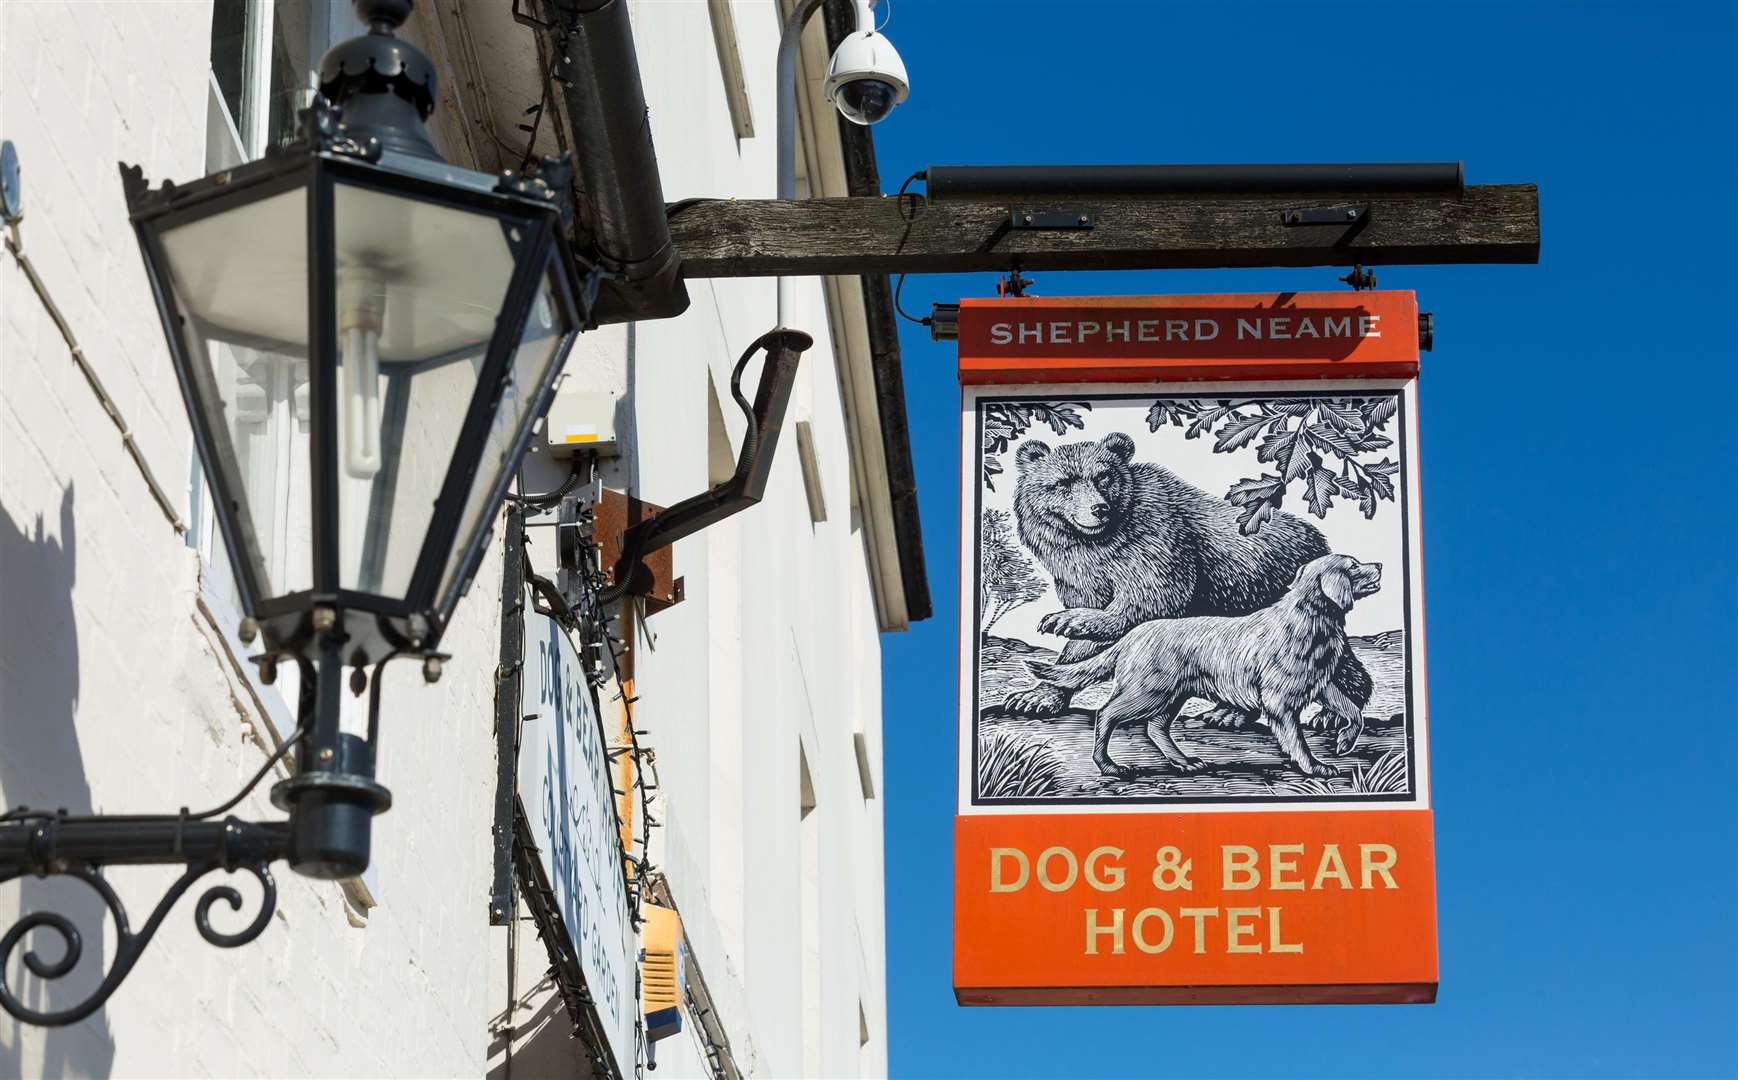 Overlooking the picturesque village square, the Dog & Bear Hotel has 24 en-suite bedrooms